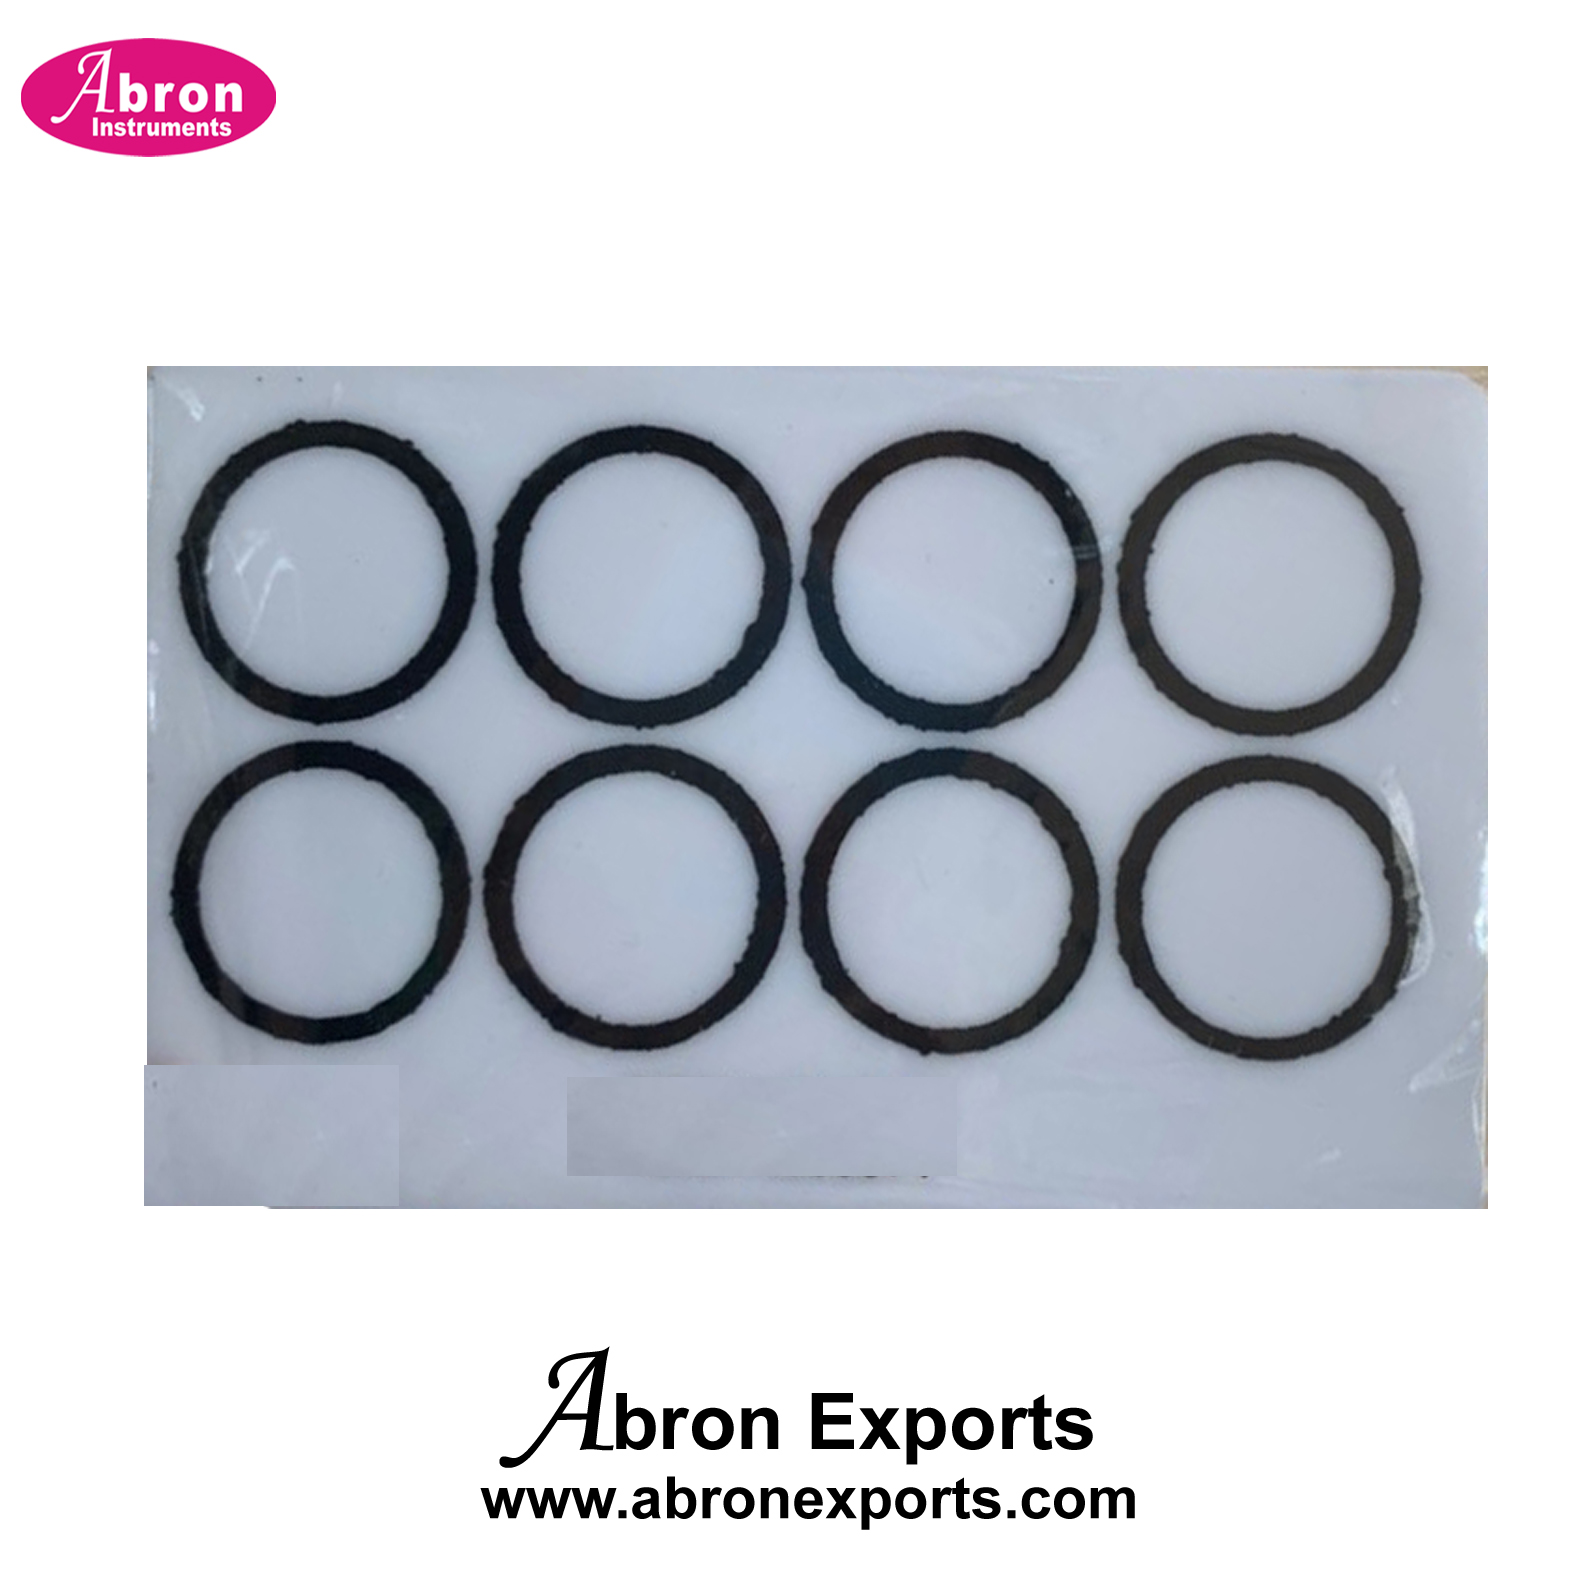 Glass Slide Rose Bengal 8 Rings Agglutination Glass Slide Rings Widal Test 10pc Abron ABM-2775RB8 